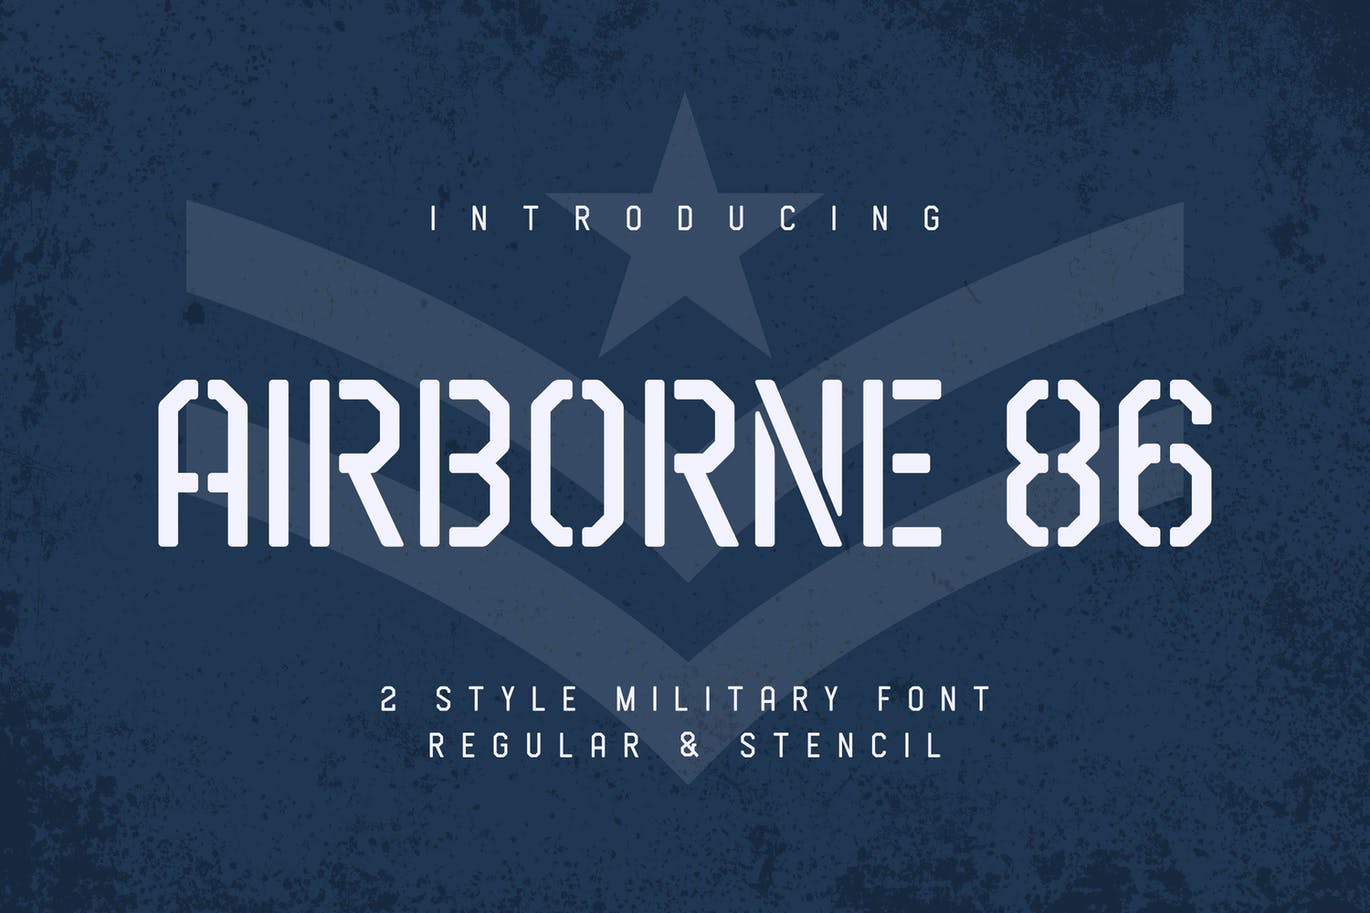 A two style military font